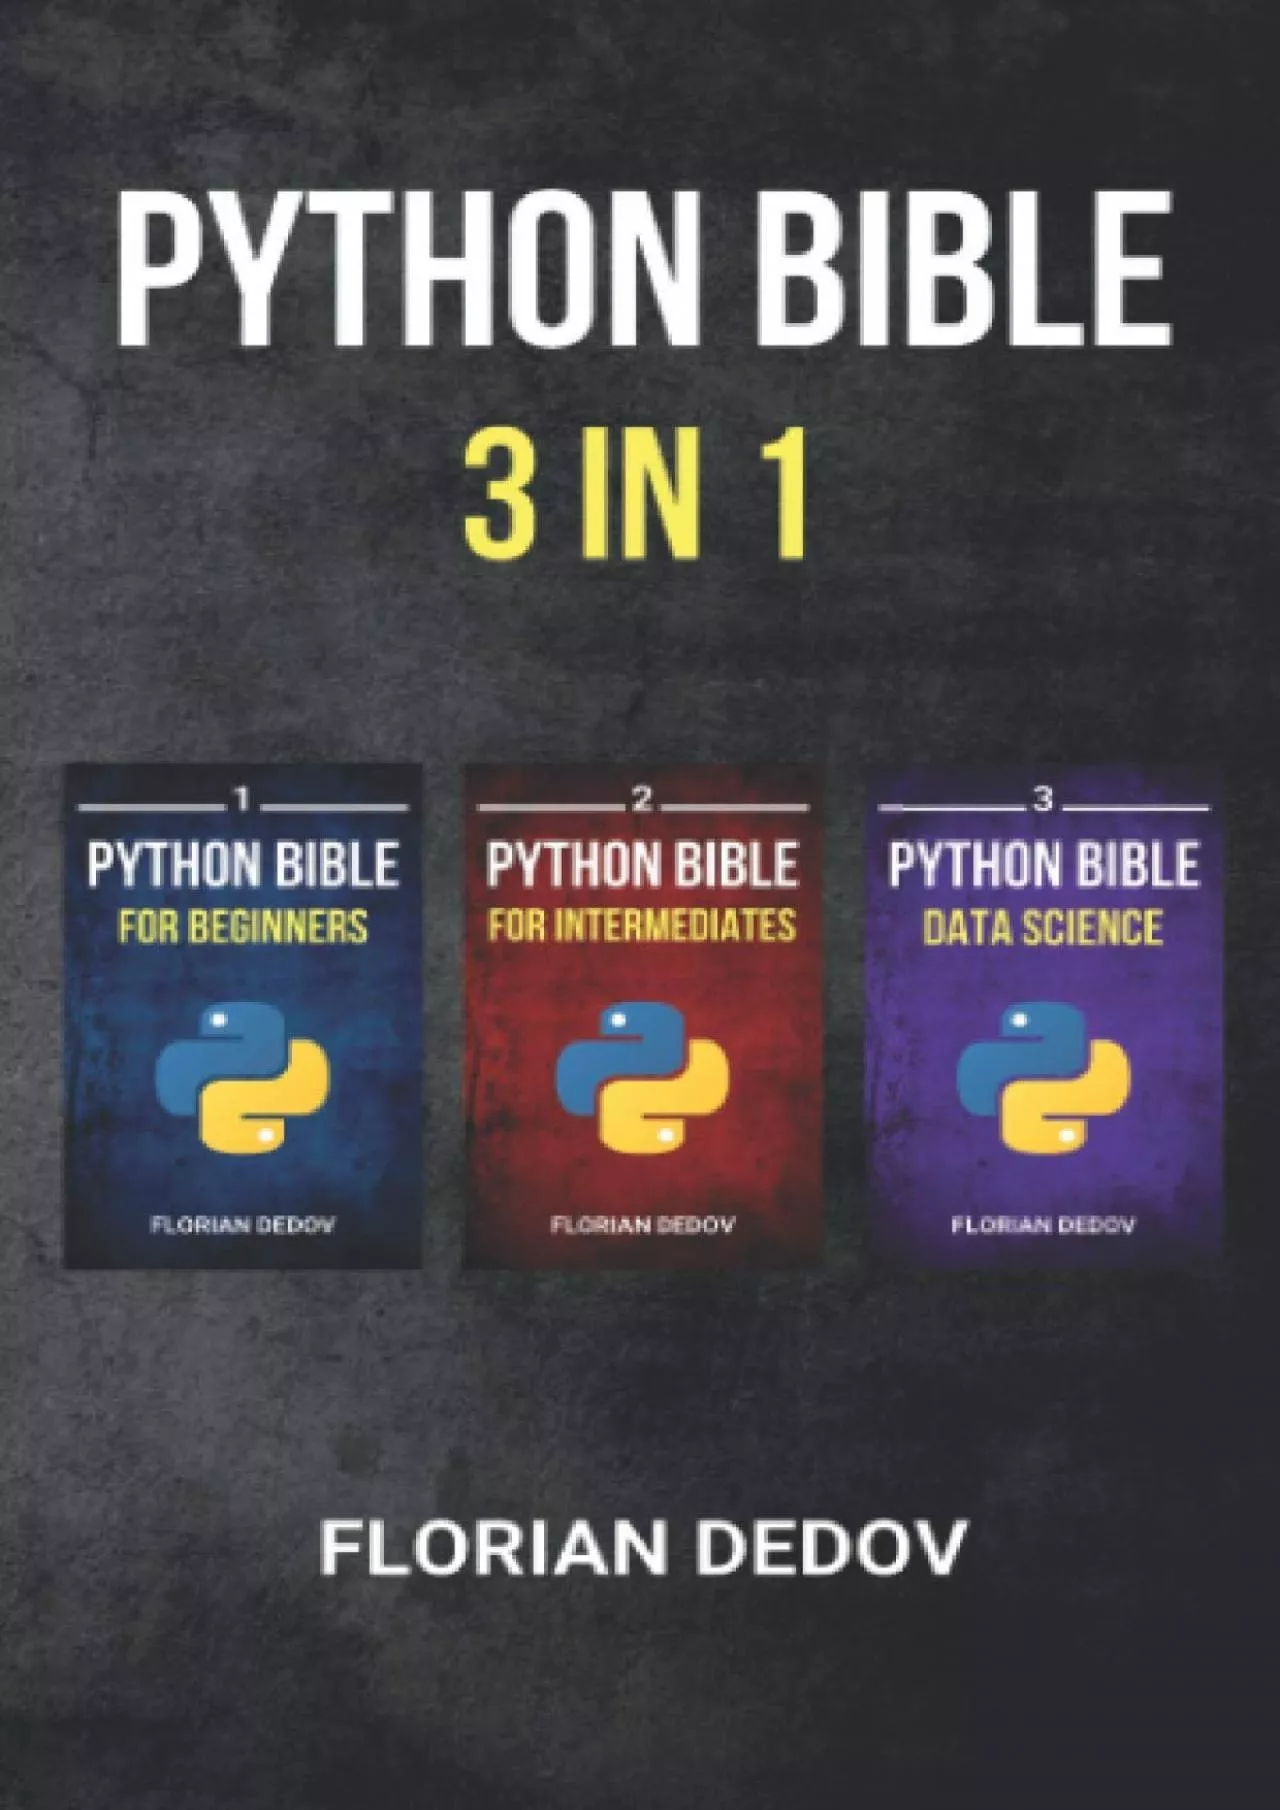 [READING BOOK]-The Python Bible 3 in 1 Volumes One to Three (Beginner, Intermediate, Data